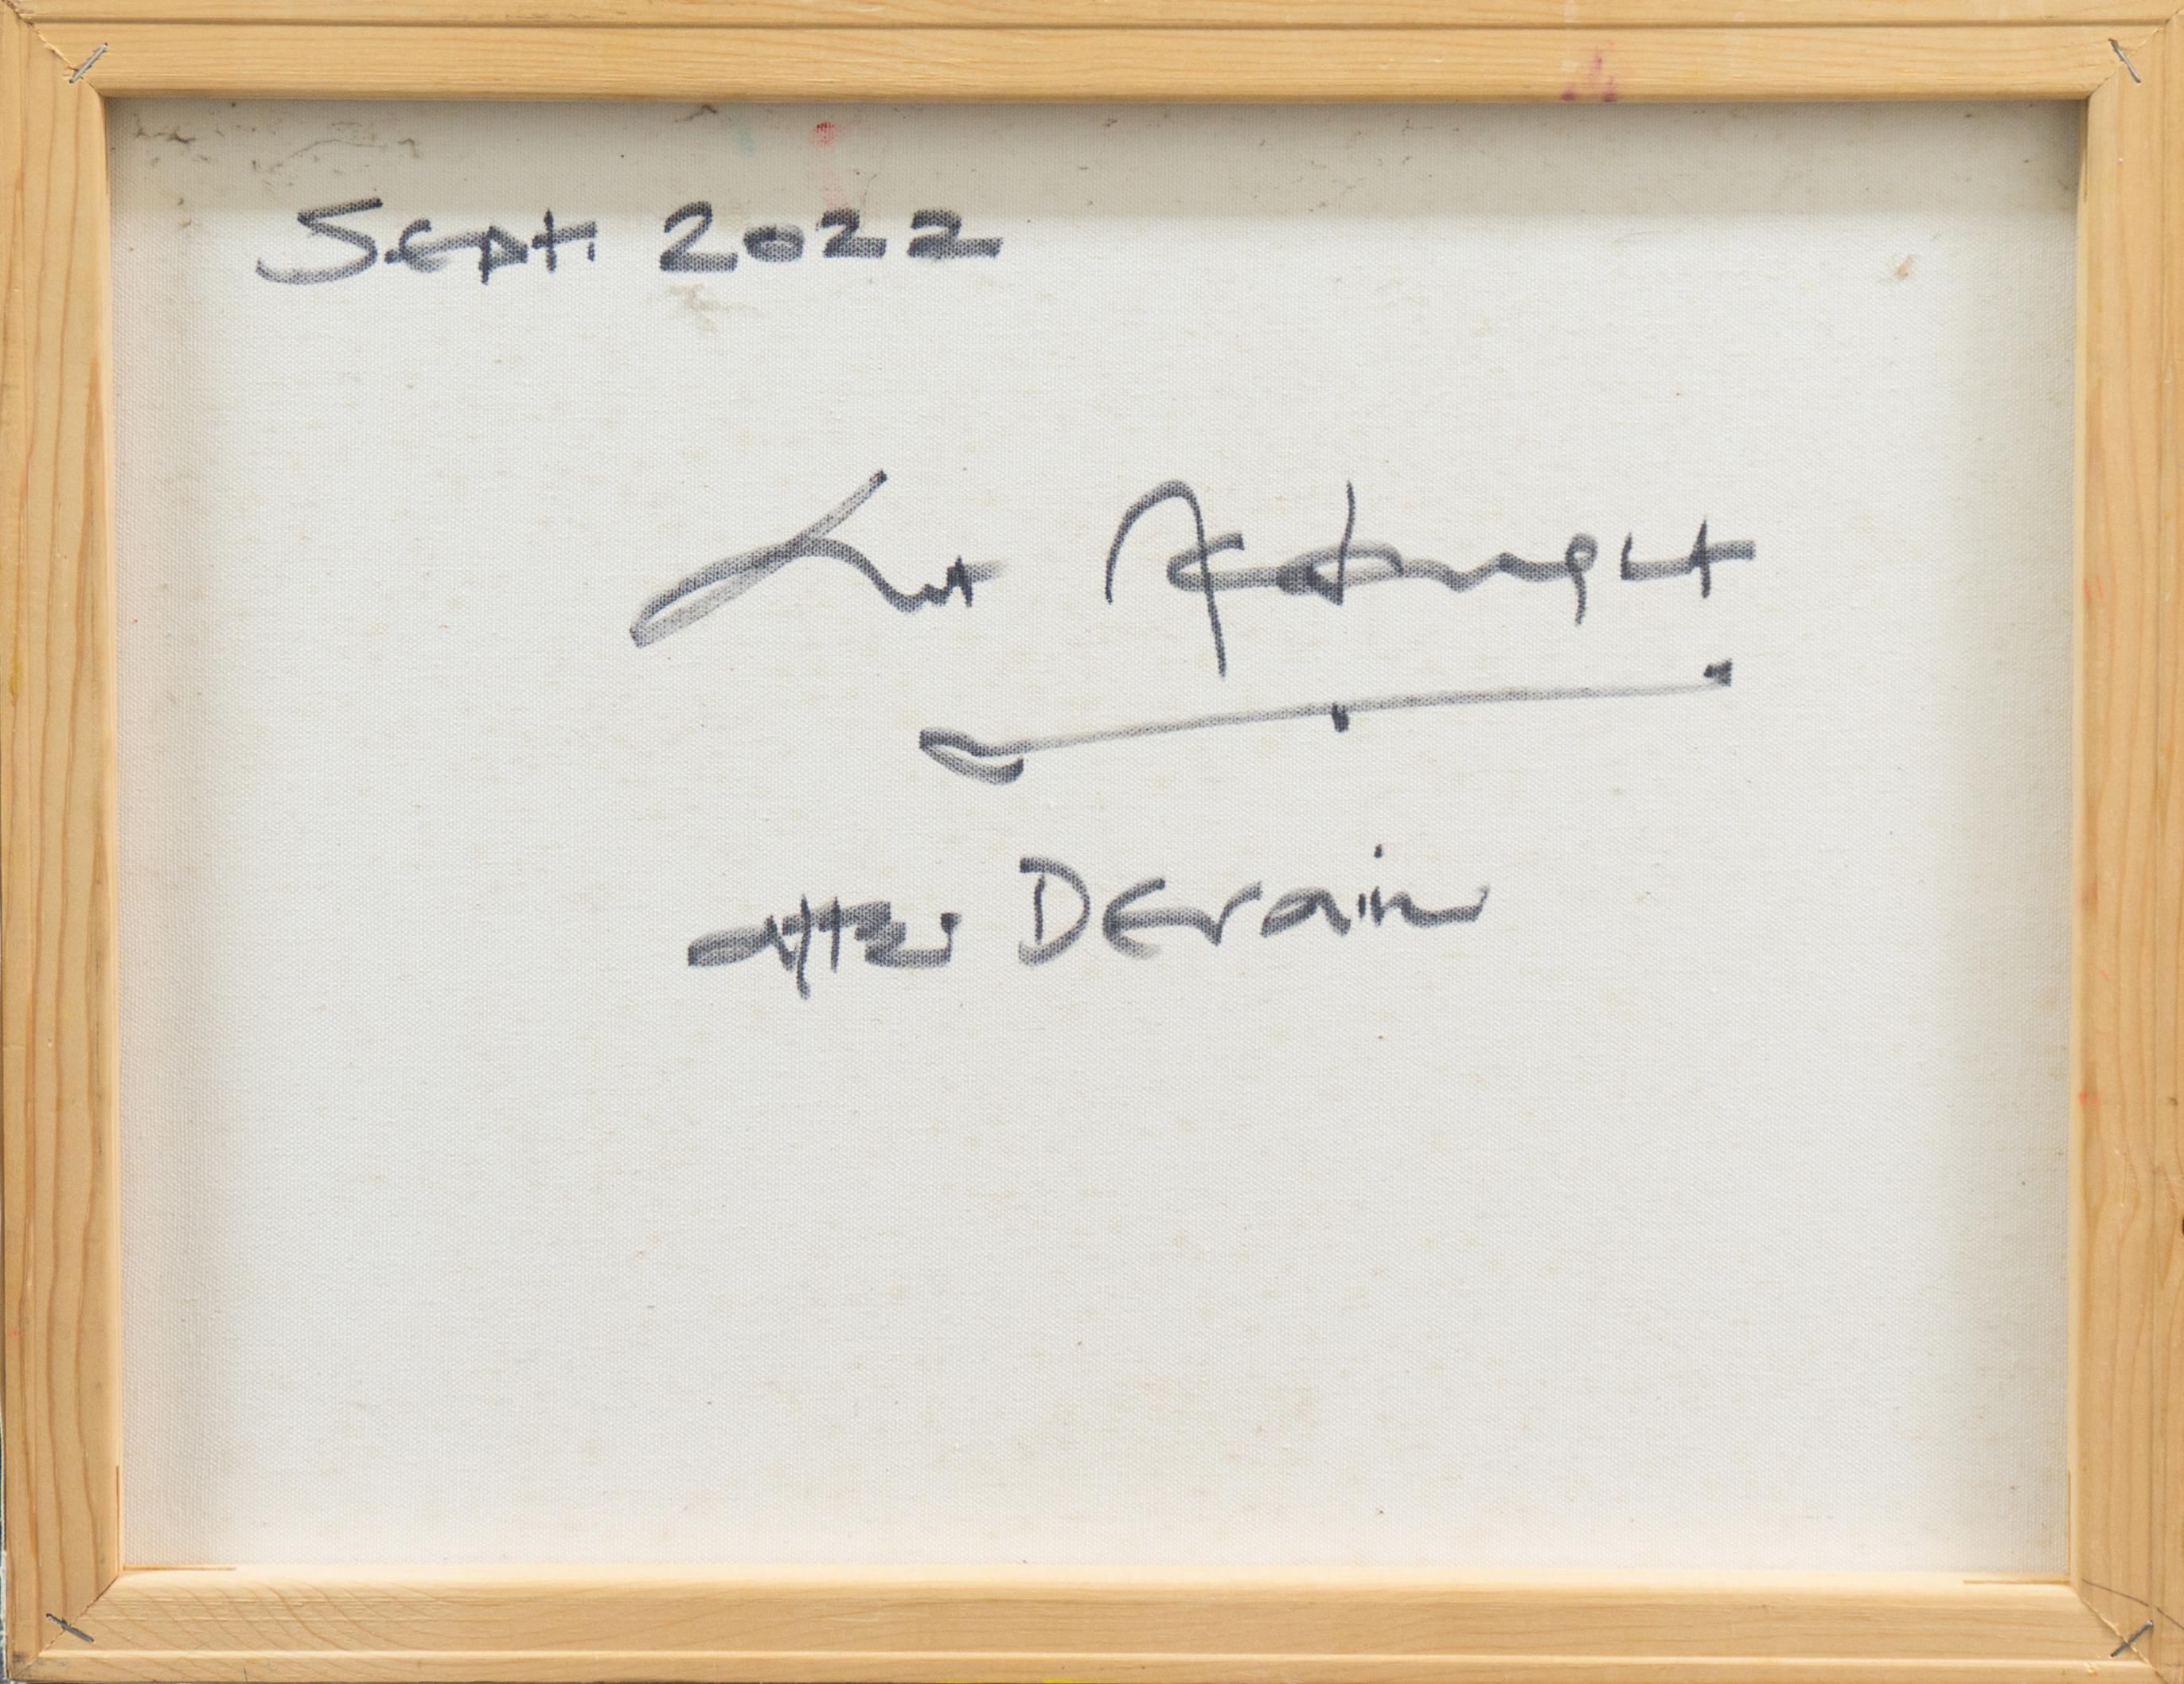 Signed verso, 'Ant McNaught', (American, born 1952), dated September 2022 and inscribed 'After Derain'.

This California Post-Impressionist and Abstract Expressionist artist studied at the Esalen Institute with Erin Gafill and Tom Birmingham and,